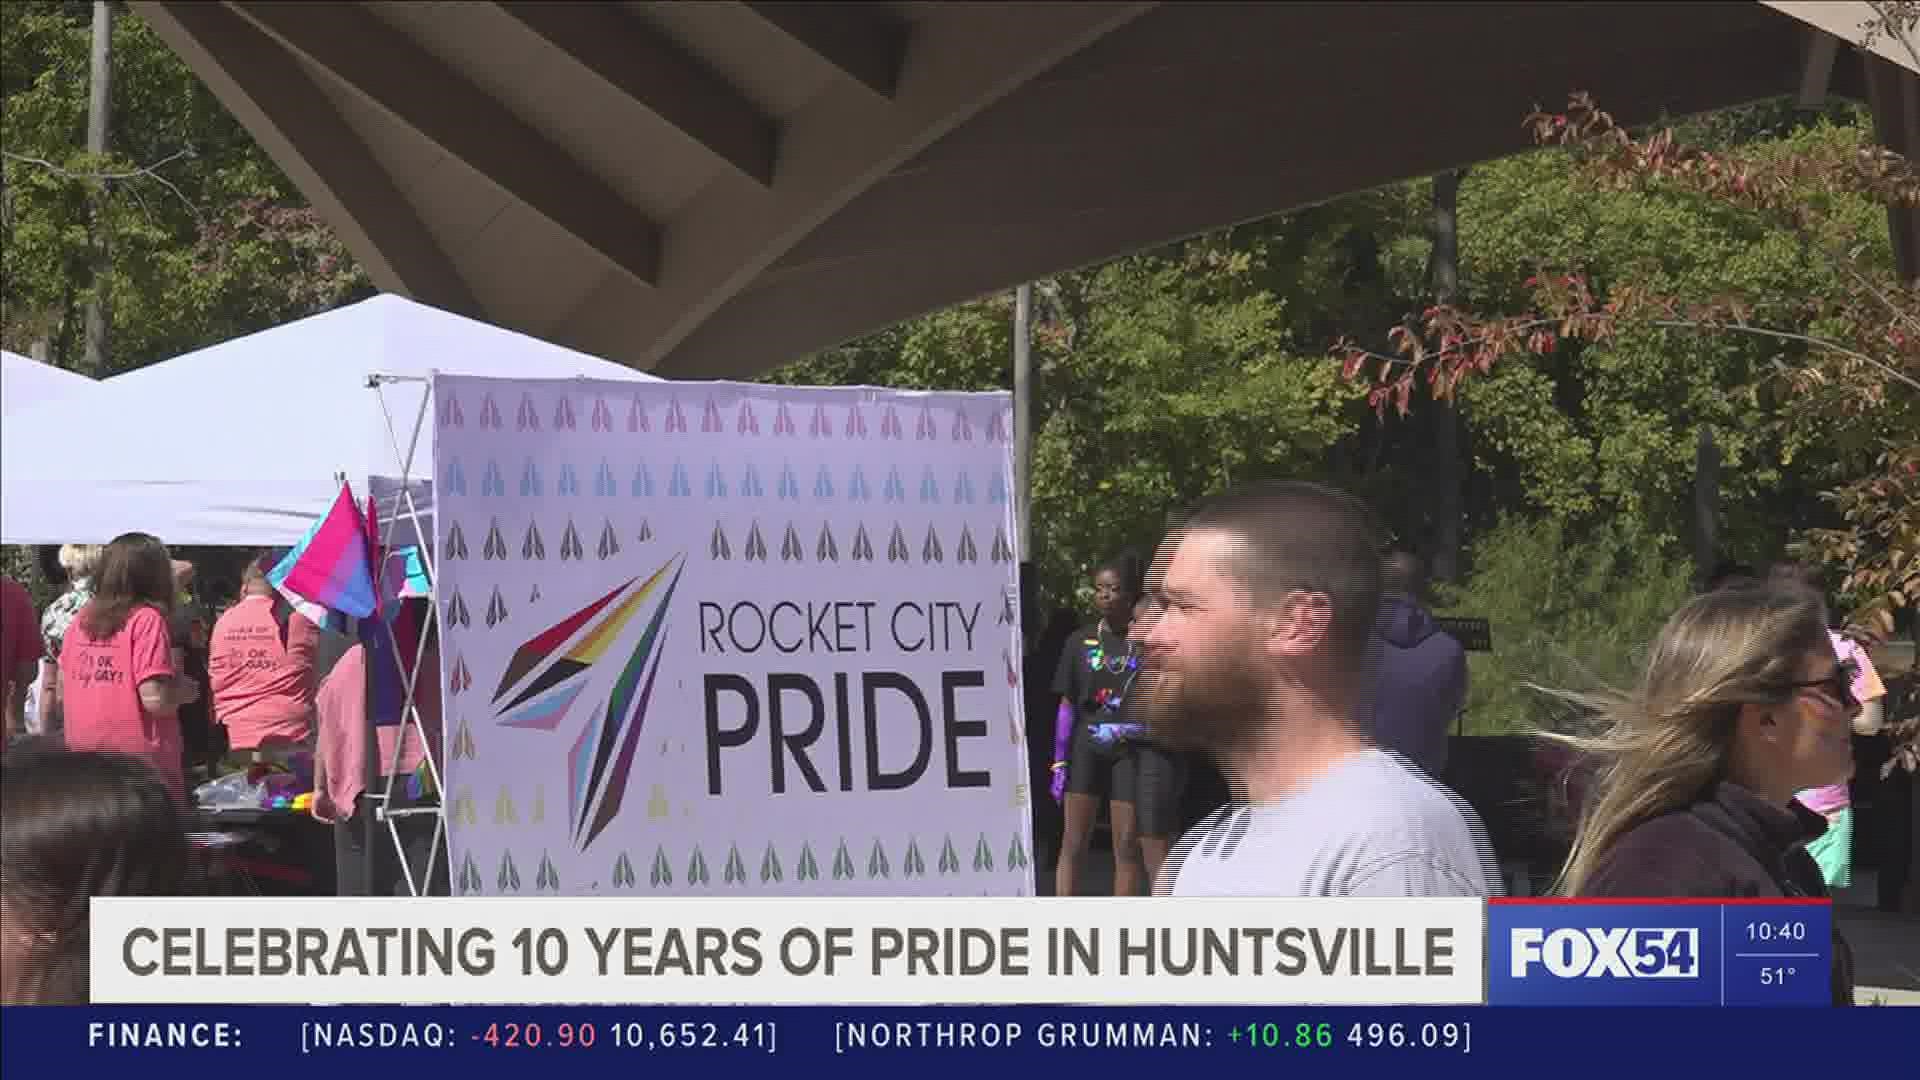 Rocket City Pride hosted their annual festival, celebrating 10 years of pride in Huntsville.